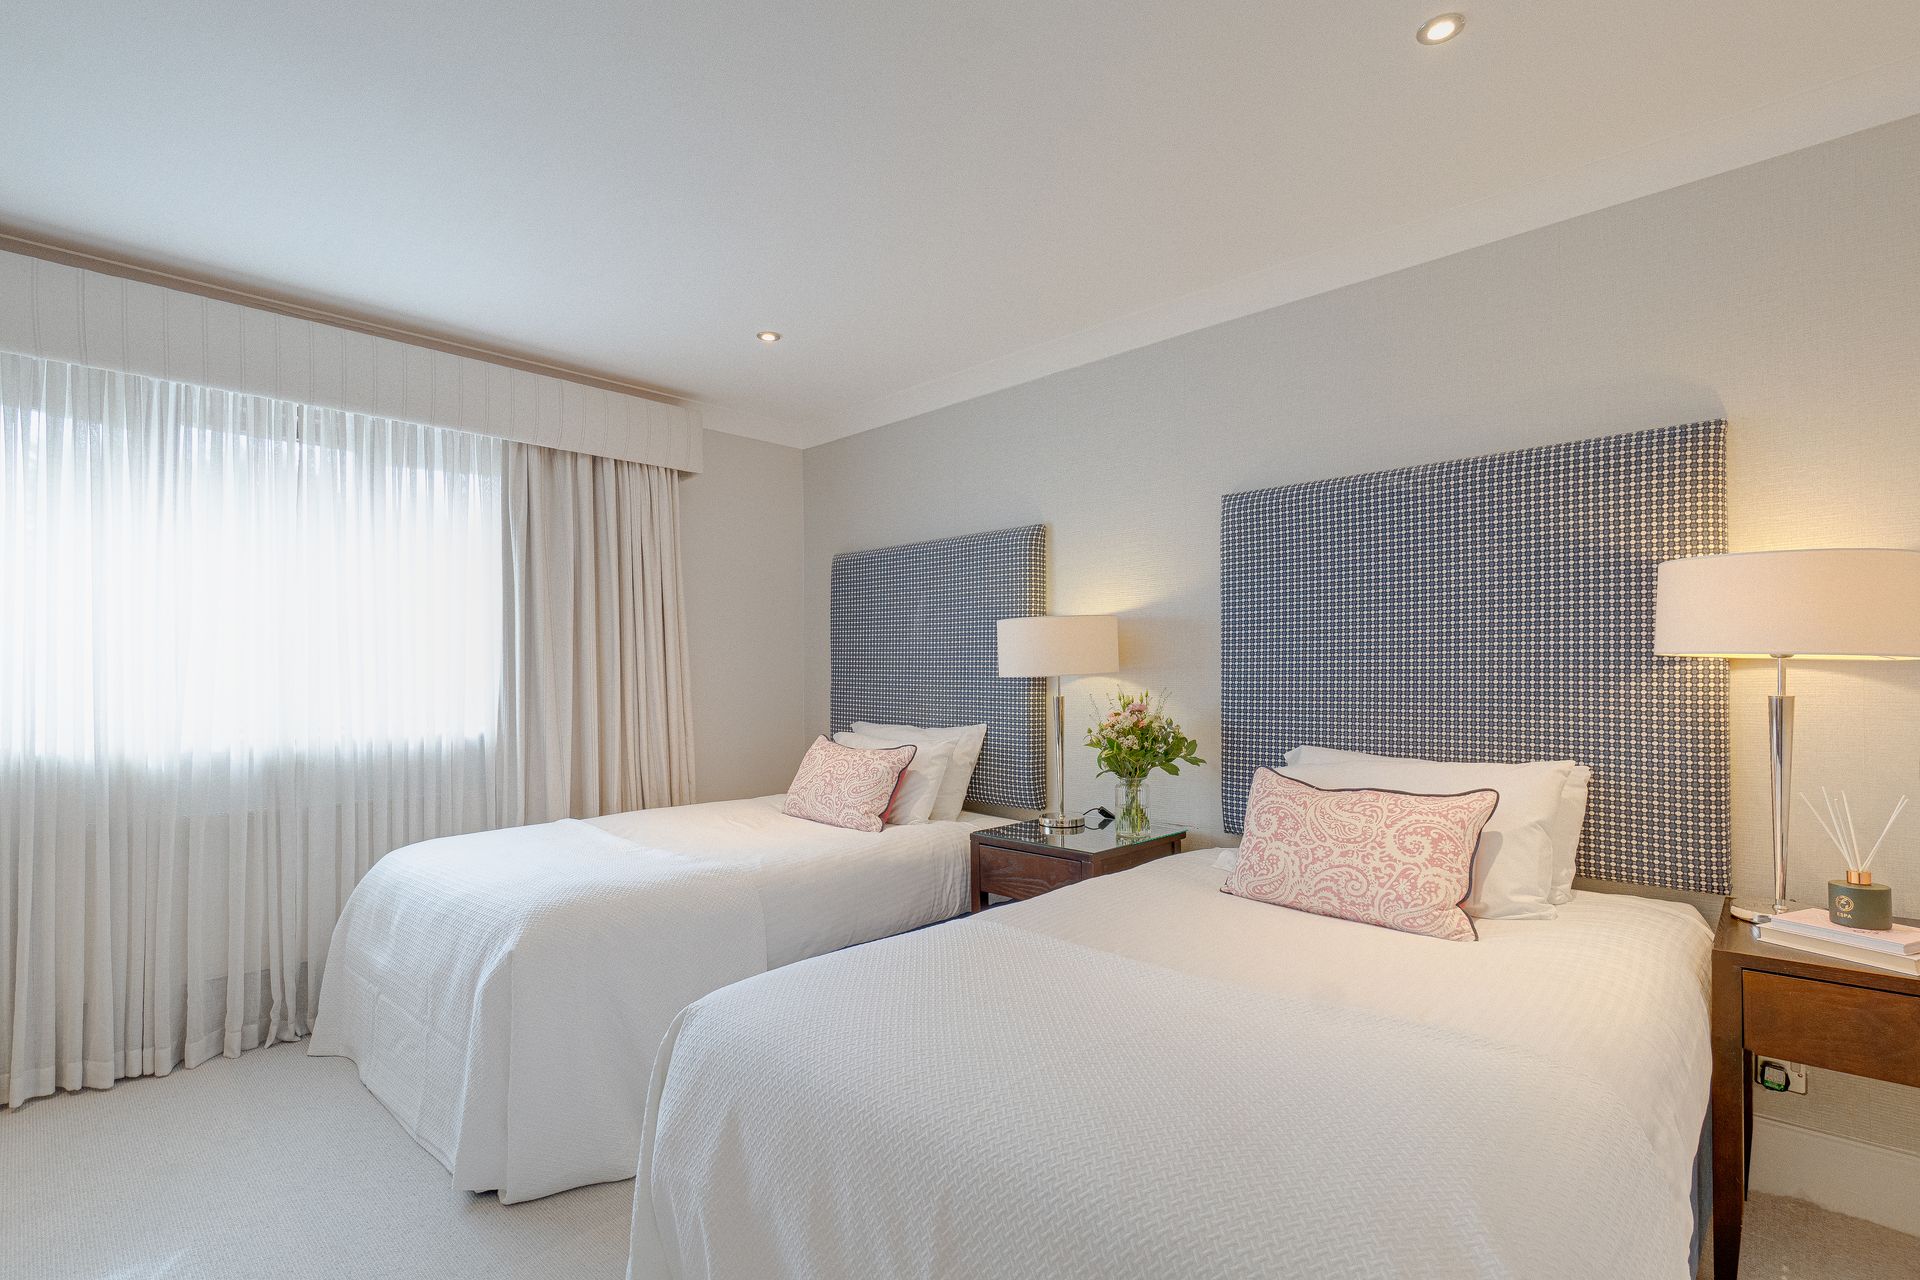 Bedrooms At The Wrightington Hotel Health Club & Spa Classic